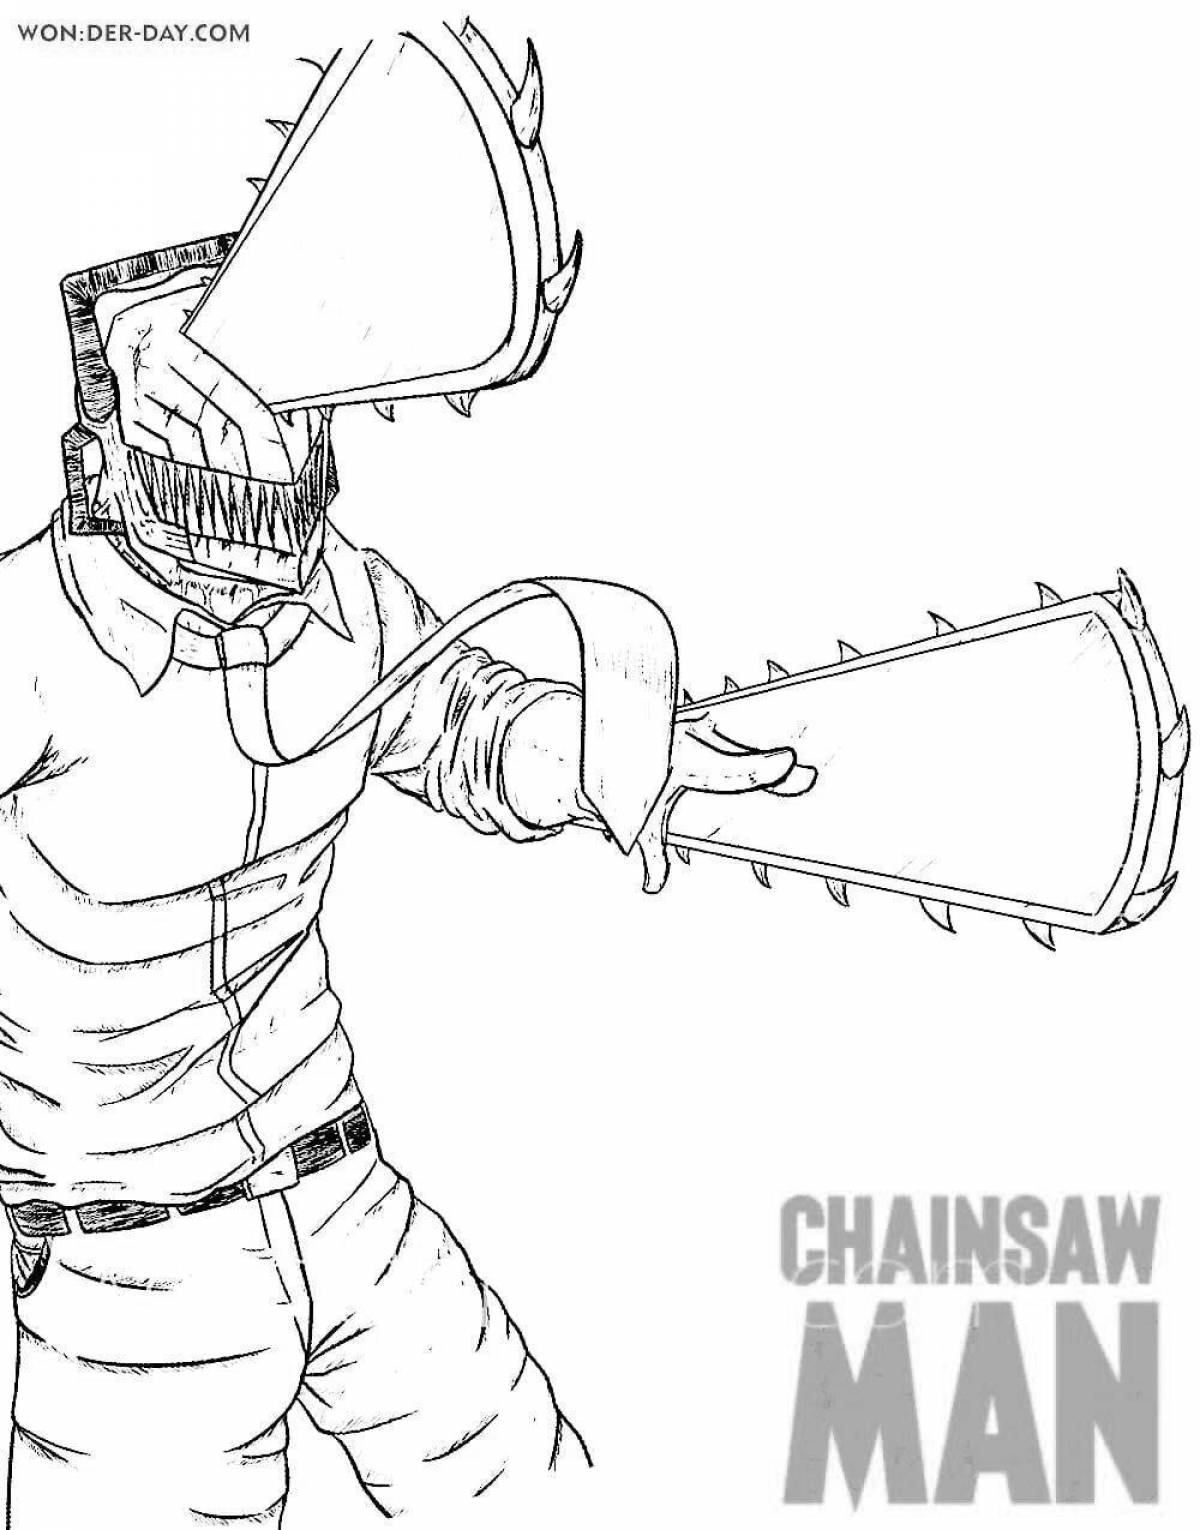 Fun power man chainsaw coloring page